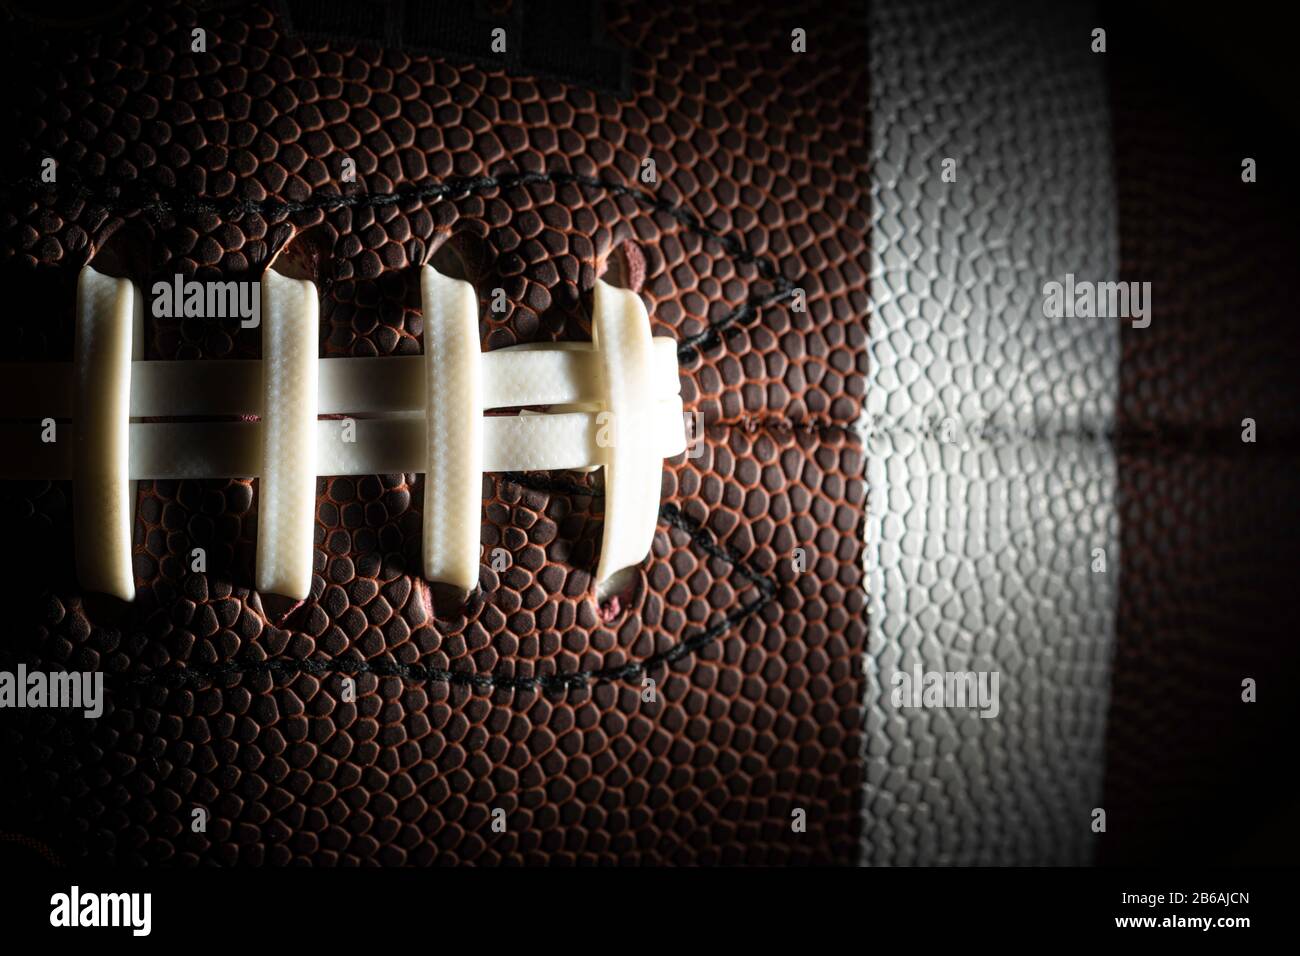 Close-up of an American football on black background Stock Photo